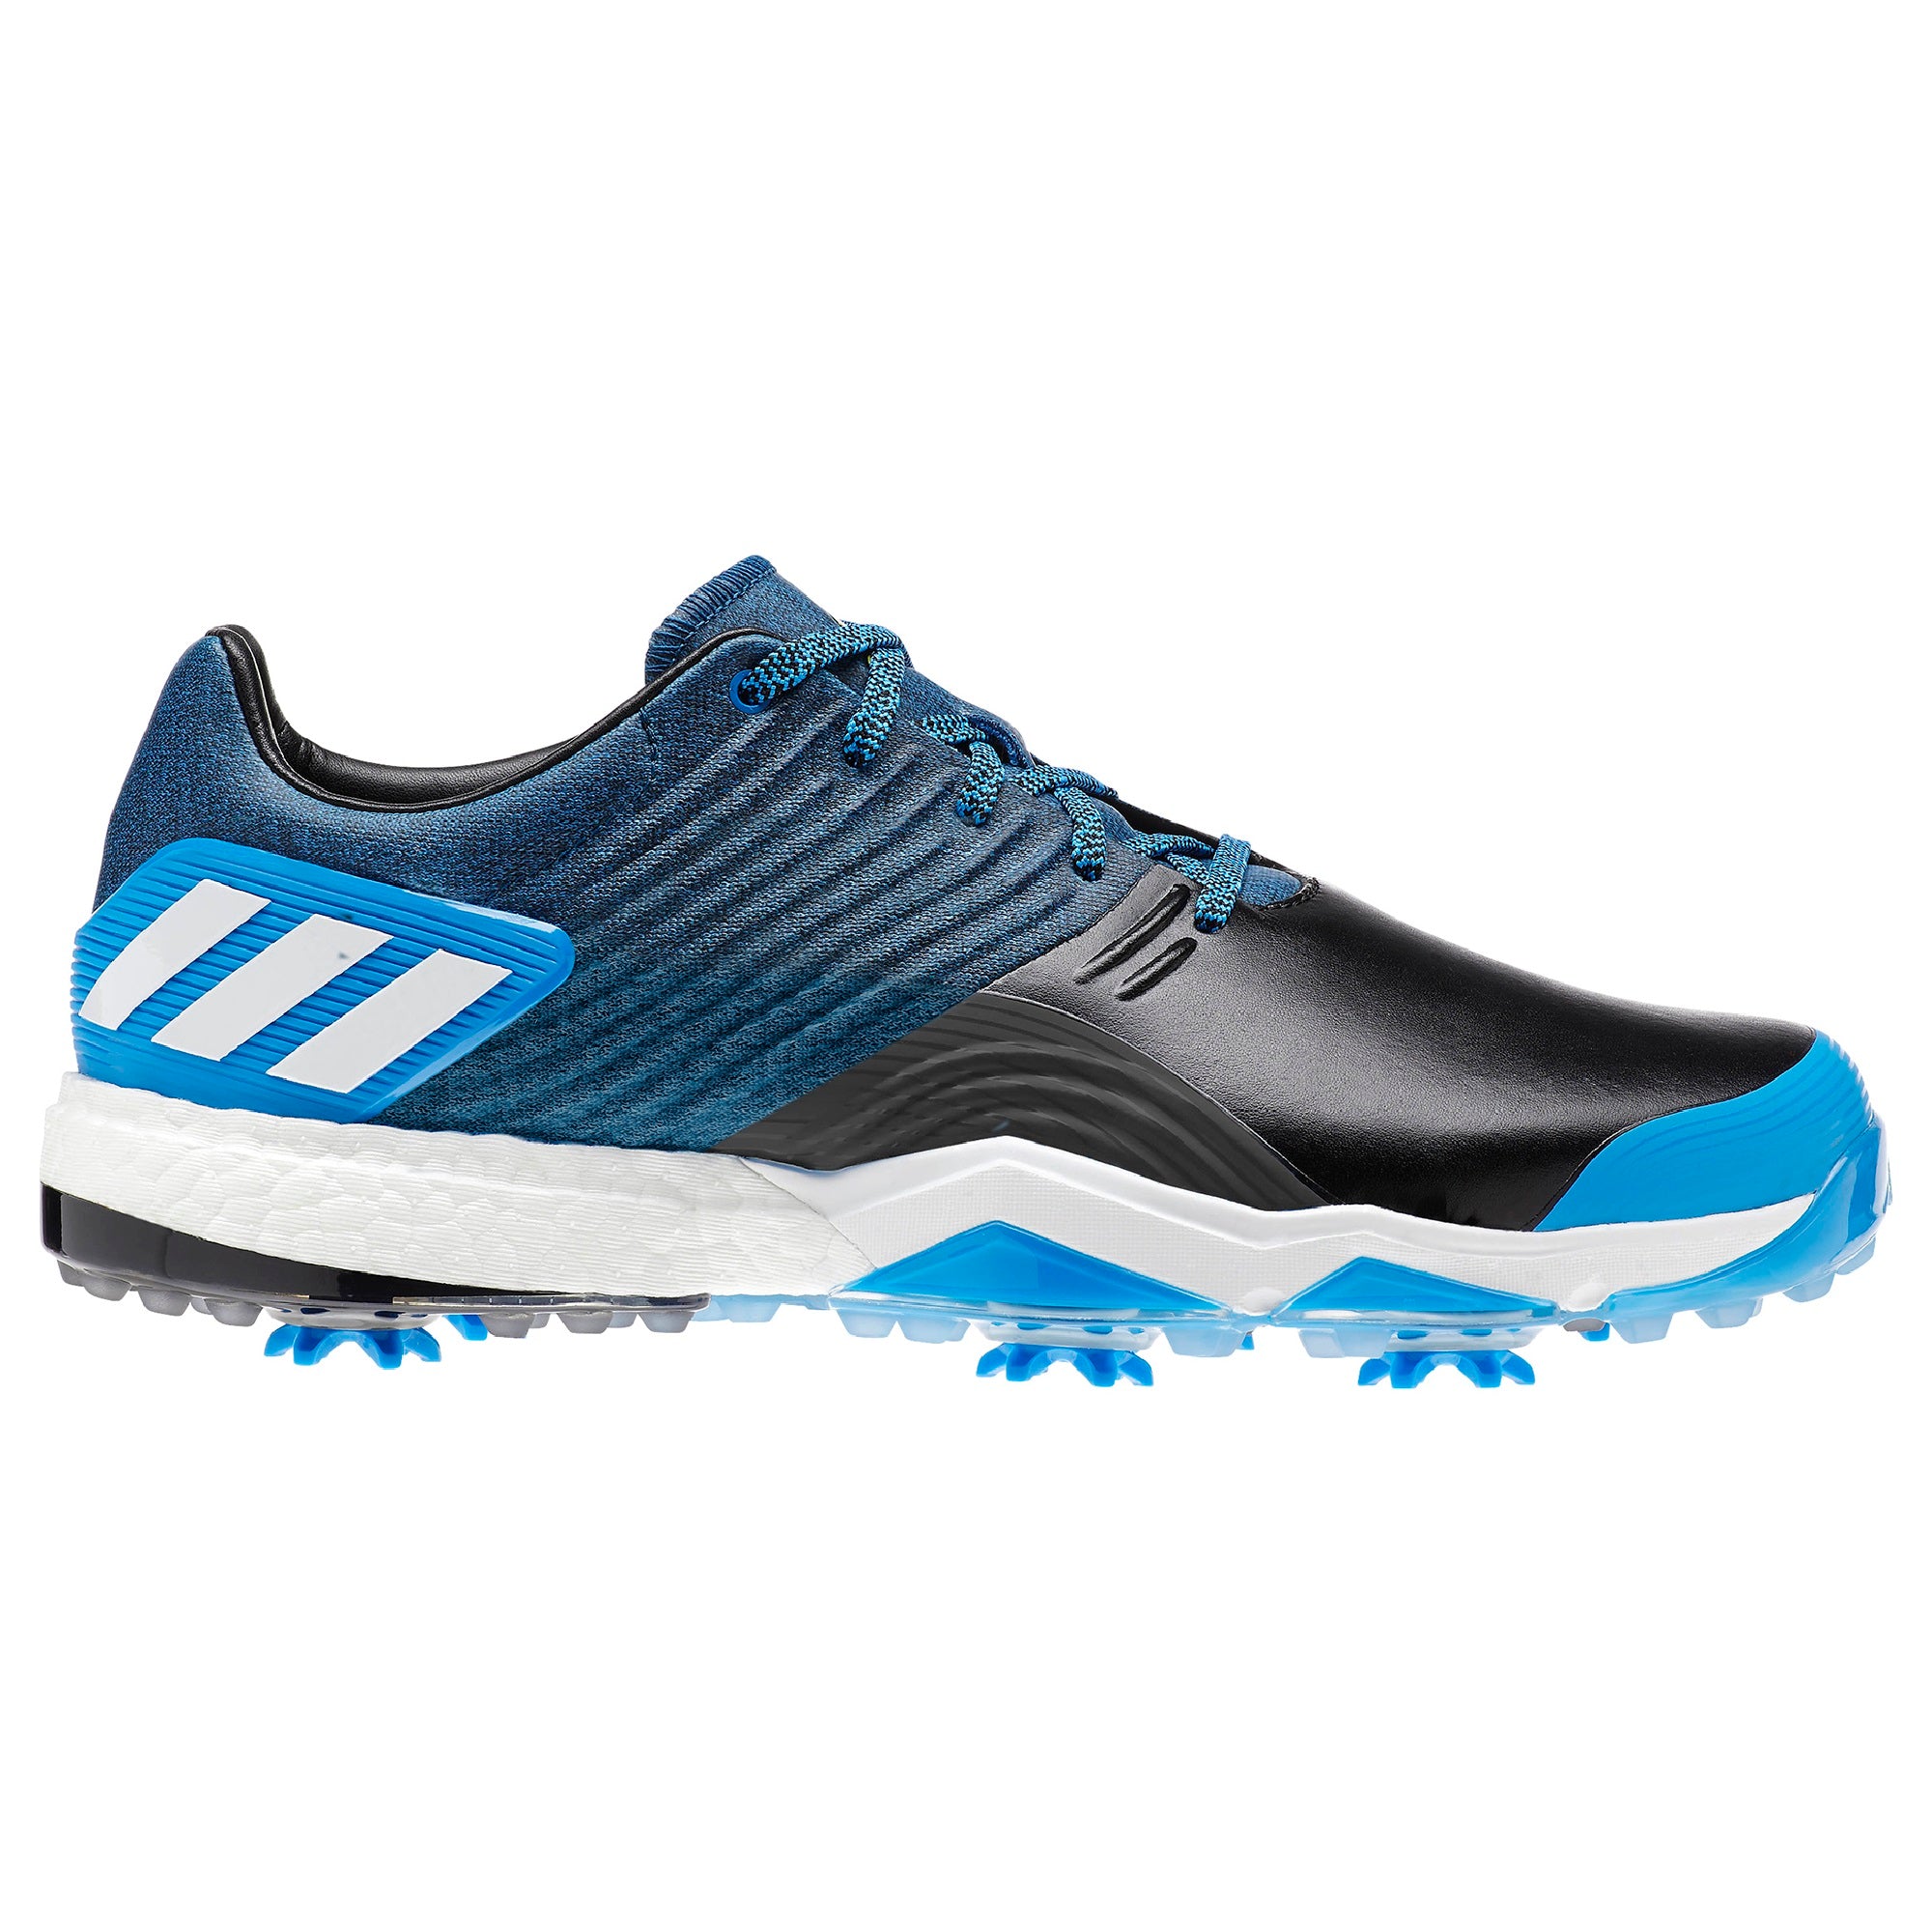 power golf shoes